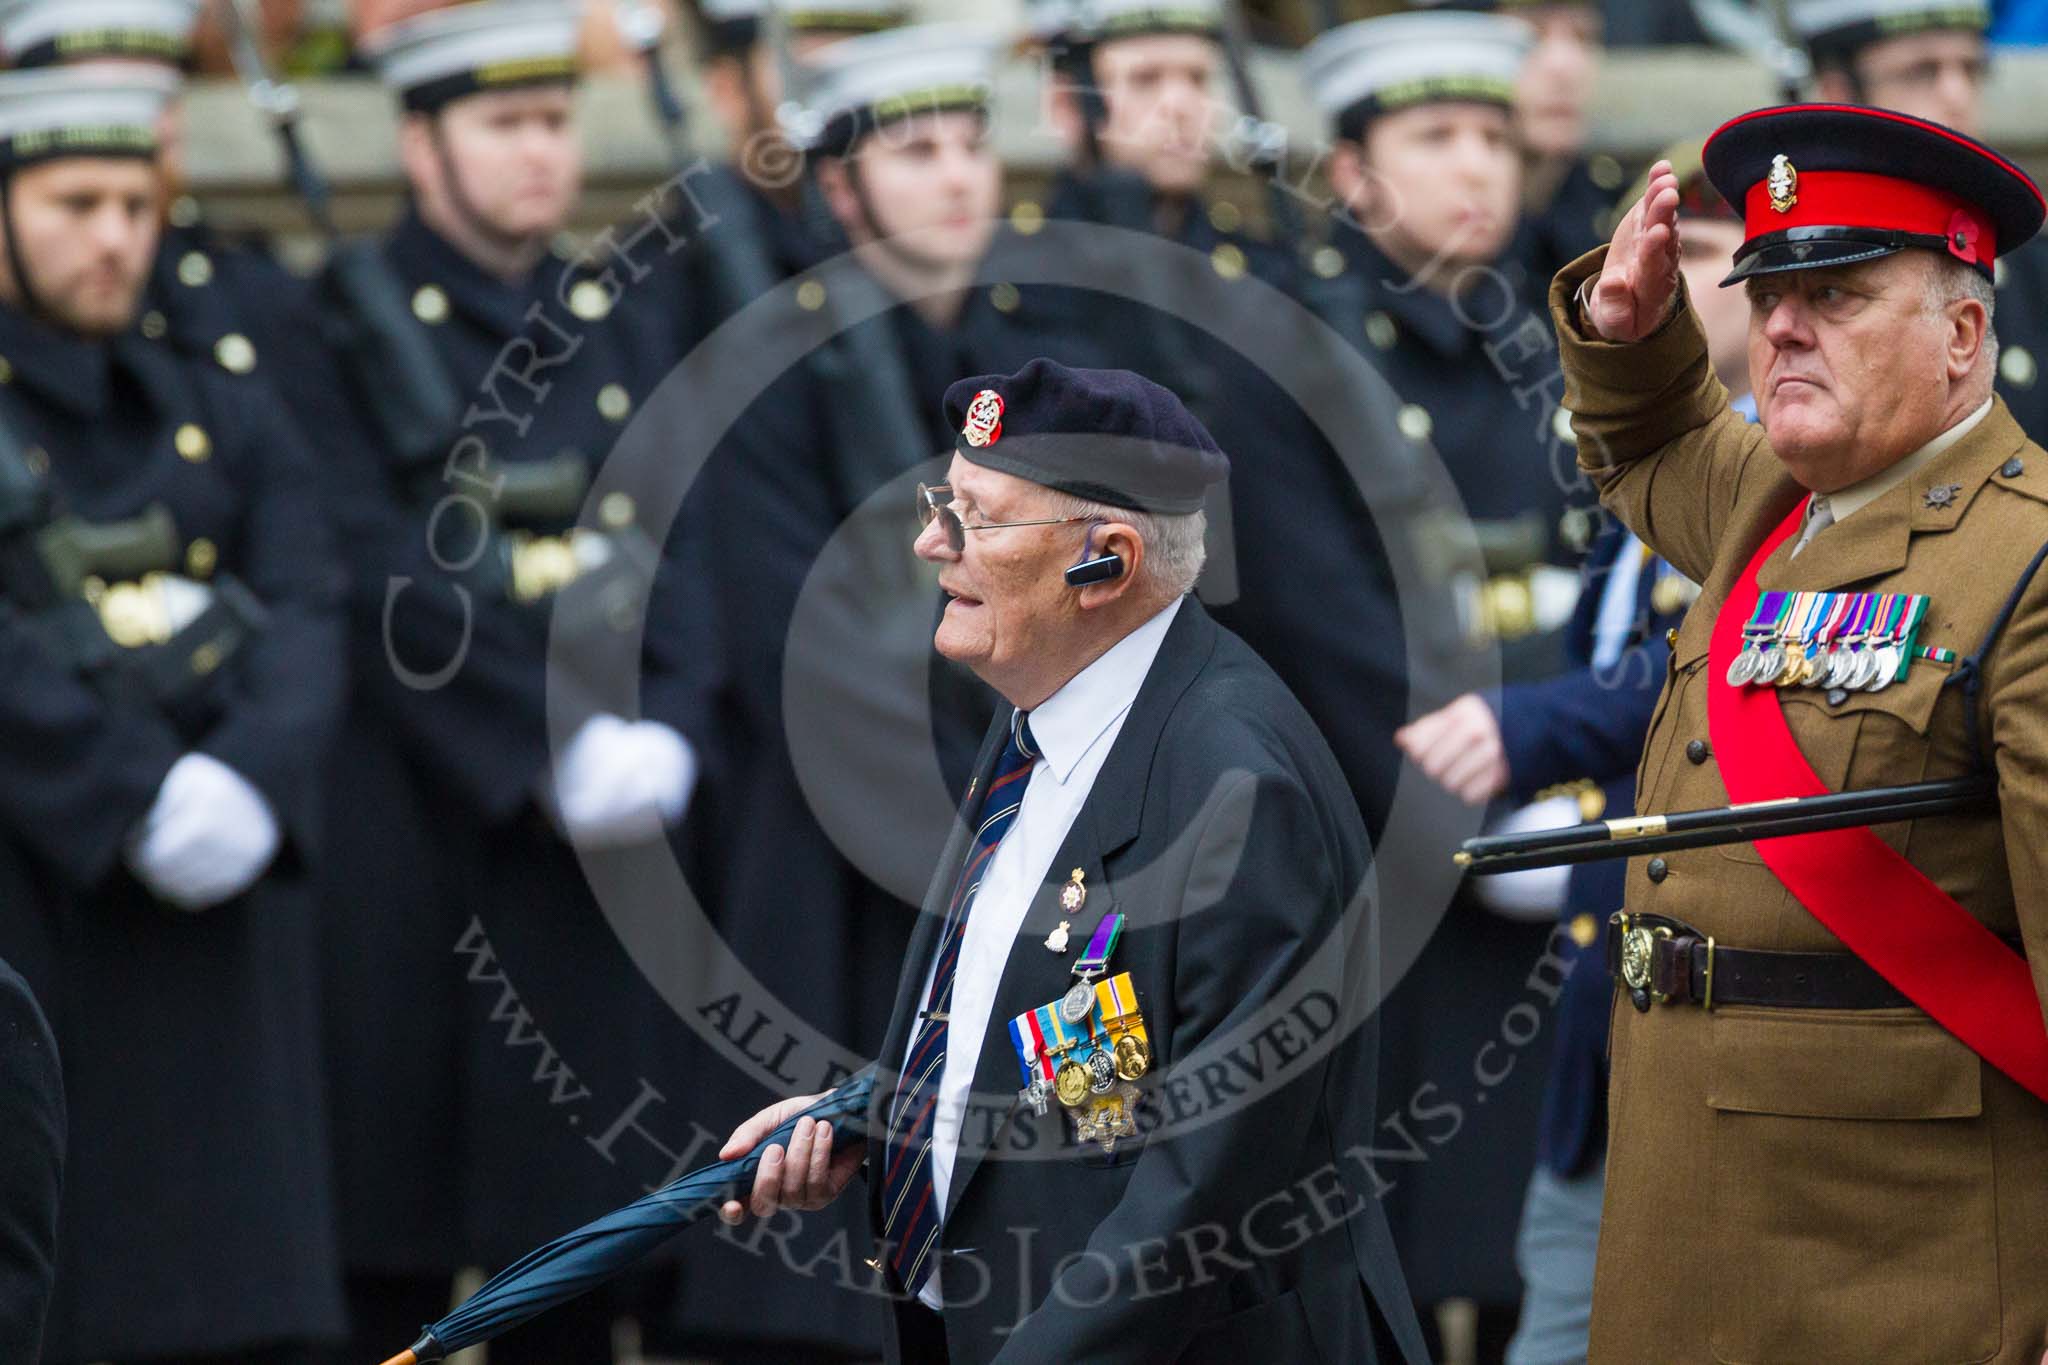 Remembrance Sunday at the Cenotaph 2015: Group A15, Princess of Wales's Royal Regiment.
Cenotaph, Whitehall, London SW1,
London,
Greater London,
United Kingdom,
on 08 November 2015 at 12:11, image #1306